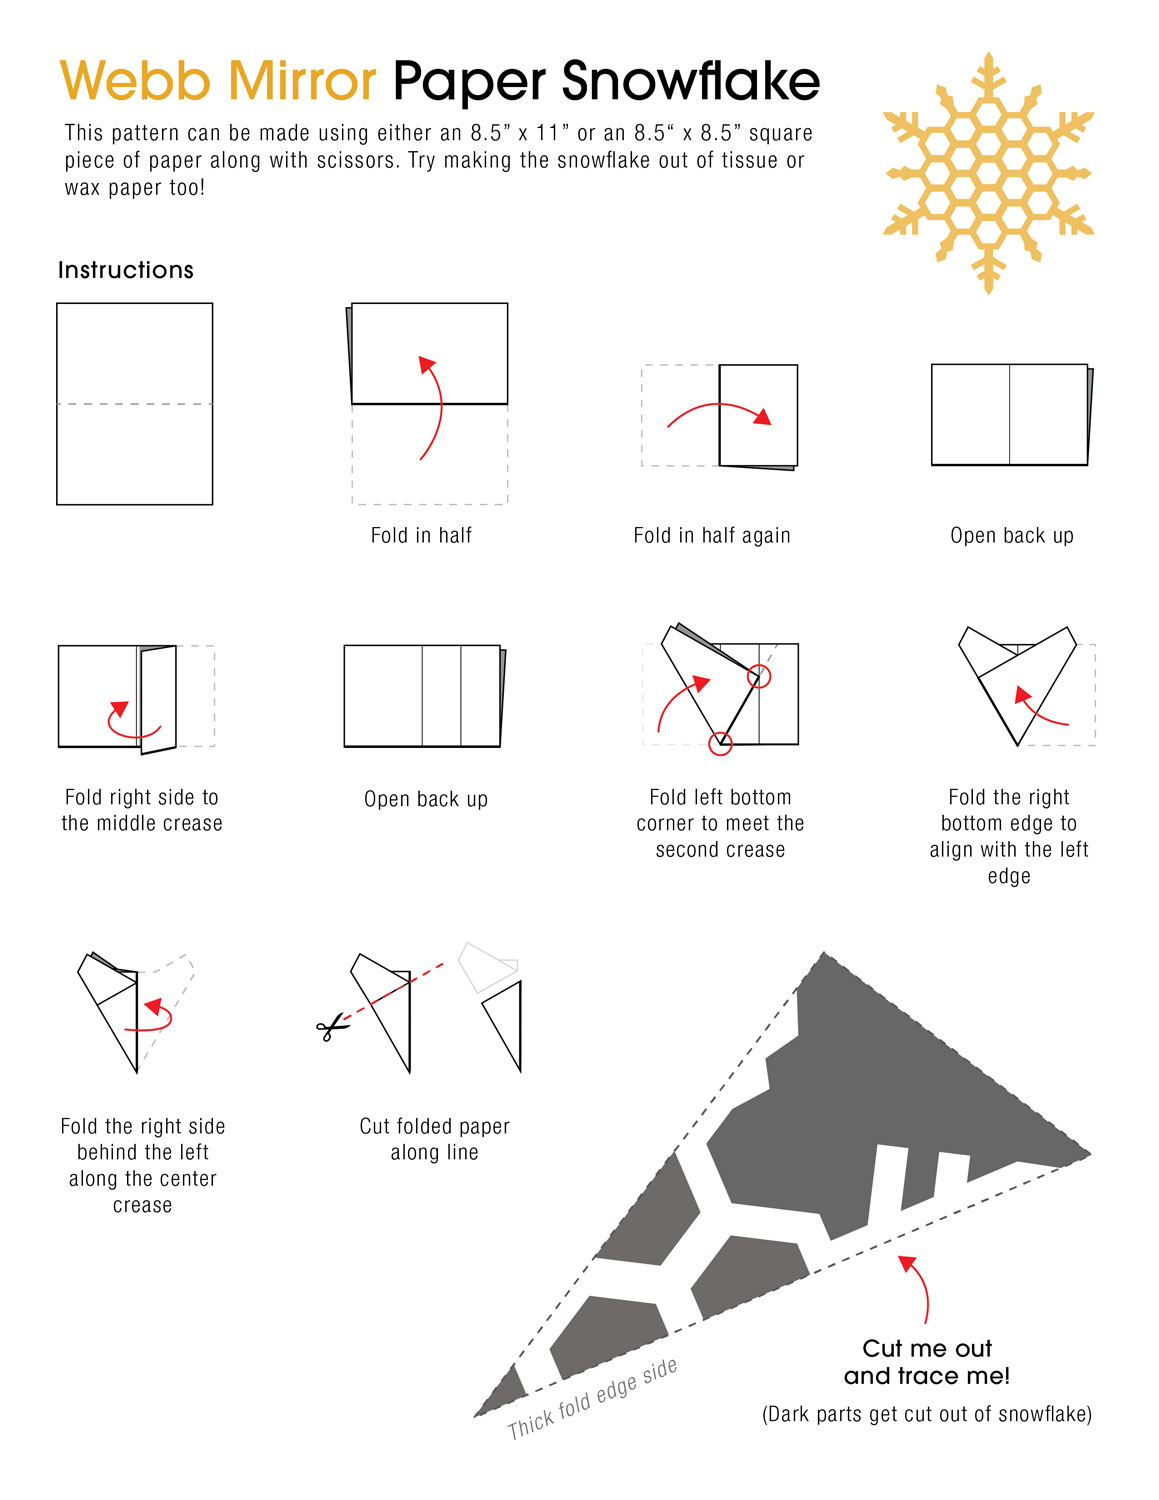 Graphic containing instructions on how to make a Webb Mirror Paper Snowflake.